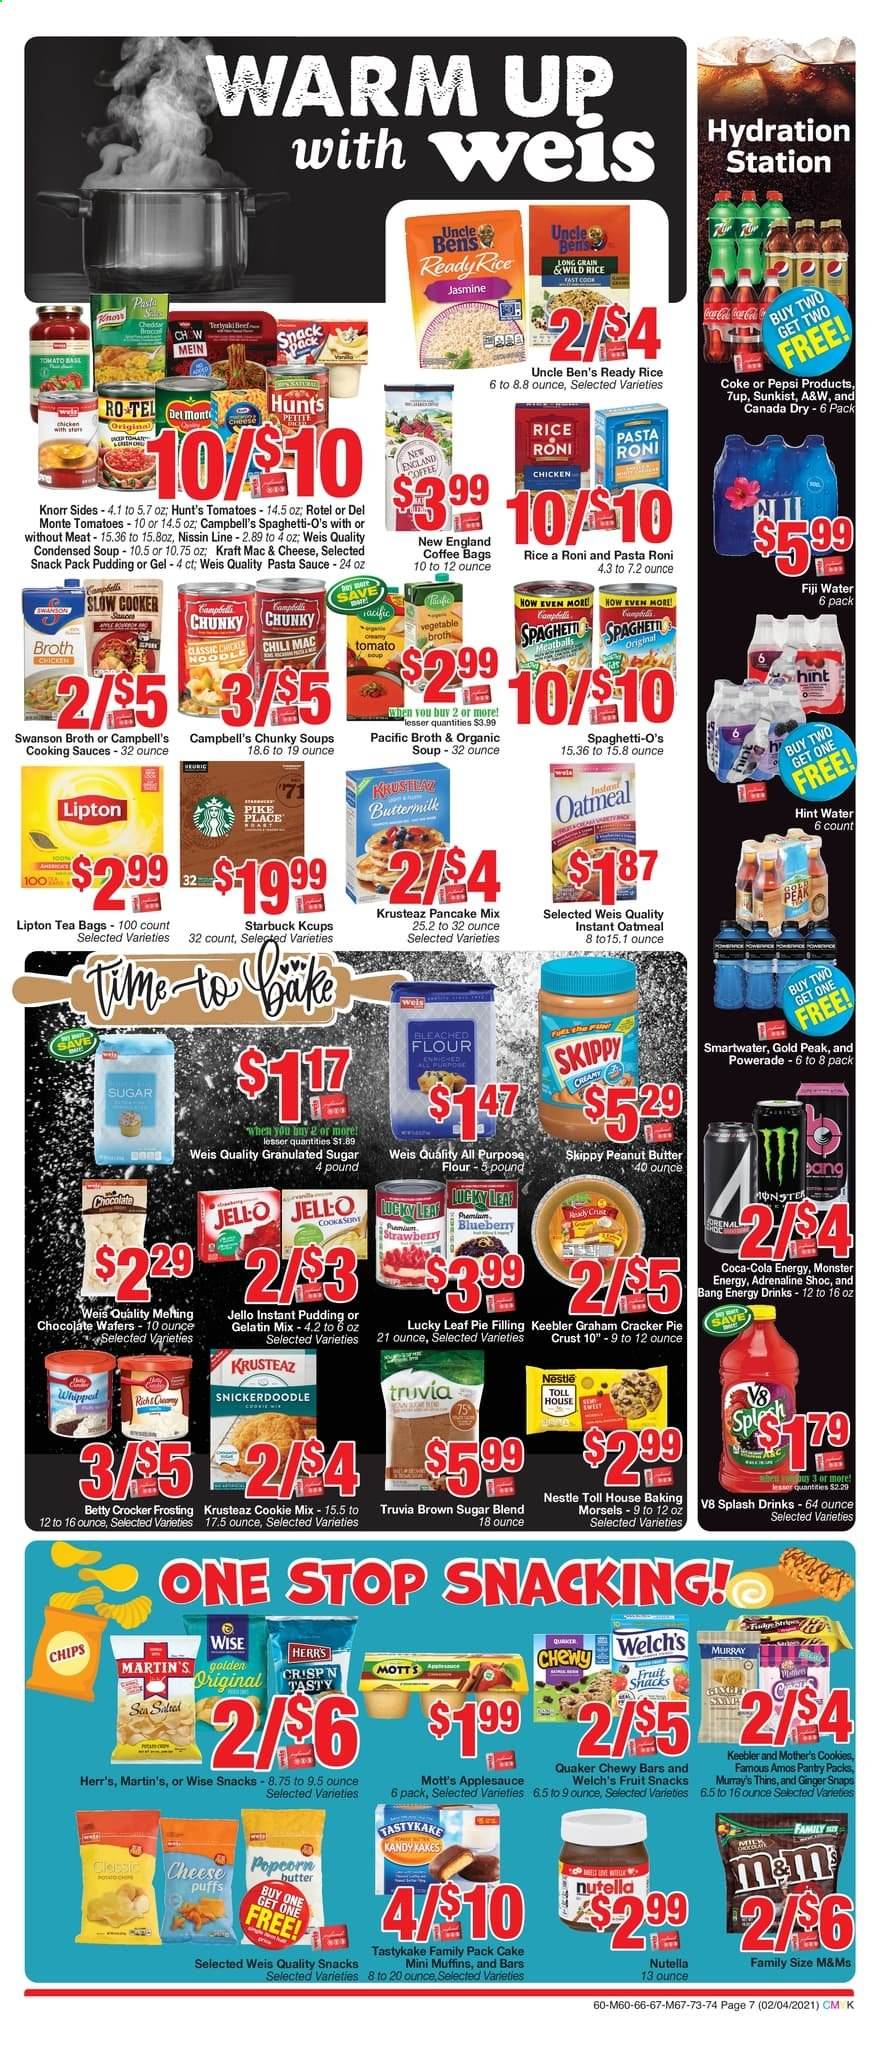 thumbnail - Weis Flyer - 02/04/2021 - 03/11/2021 - Sales products - puffs, cake, pie, pancakes, muffin, ginger, Campbell's, macaroni & cheese, condensed soup, soup, Knorr, Quaker, Welch's, Kraft®, Nissin, pudding, buttermilk, cookies, Nestlé, wafers, Nutella, chocolate wafer, chocolate, crackers, fruit snack, Keebler, chips, Thins, all purpose flour, cane sugar, flour, frosting, granulated sugar, pie filling, oatmeal, Jell-O, broth, Uncle Ben's, rice, spaghetti, pasta sauce, apple sauce, peanut butter, Canada Dry, Coca-Cola, Powerade, Pepsi, energy drink, Monster, Lipton, 7UP, Monster Energy, A&W, Mott's, tea bags, coffee, gelatin. Page 7.